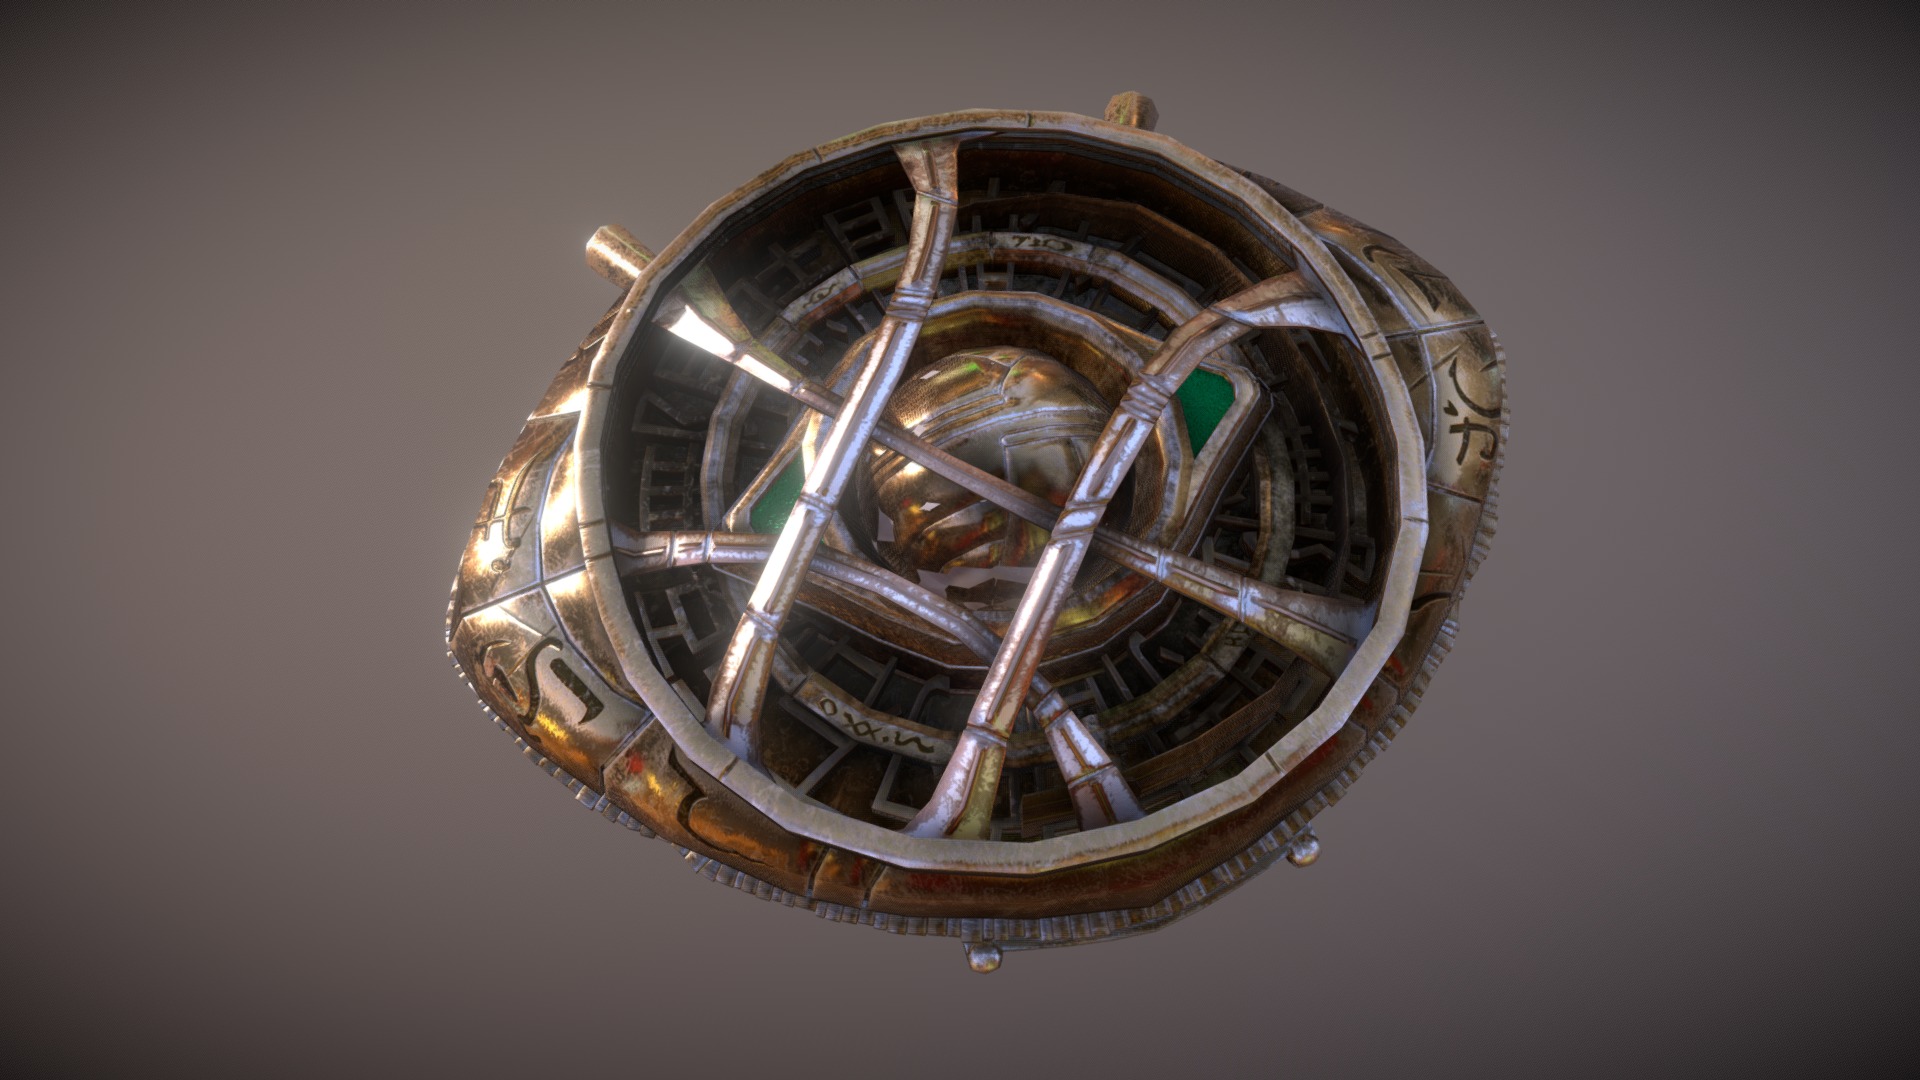 Eye of Agamotto, Dr. Strange's artefact. Gem of infinity of time is included. You can buy this model on turbosquid.

Presentation video: https://www.youtube.com/watch?v=QWoI4tWFj18&amp;t=1s

https://www.youtube.com/watch?v=t6QbQ4Qvy_0

https://www.artstation.com/artwork/lAEb5

 - Eye Of Agamotto - 3D model by de Mravi (@de_mravi) 3d model